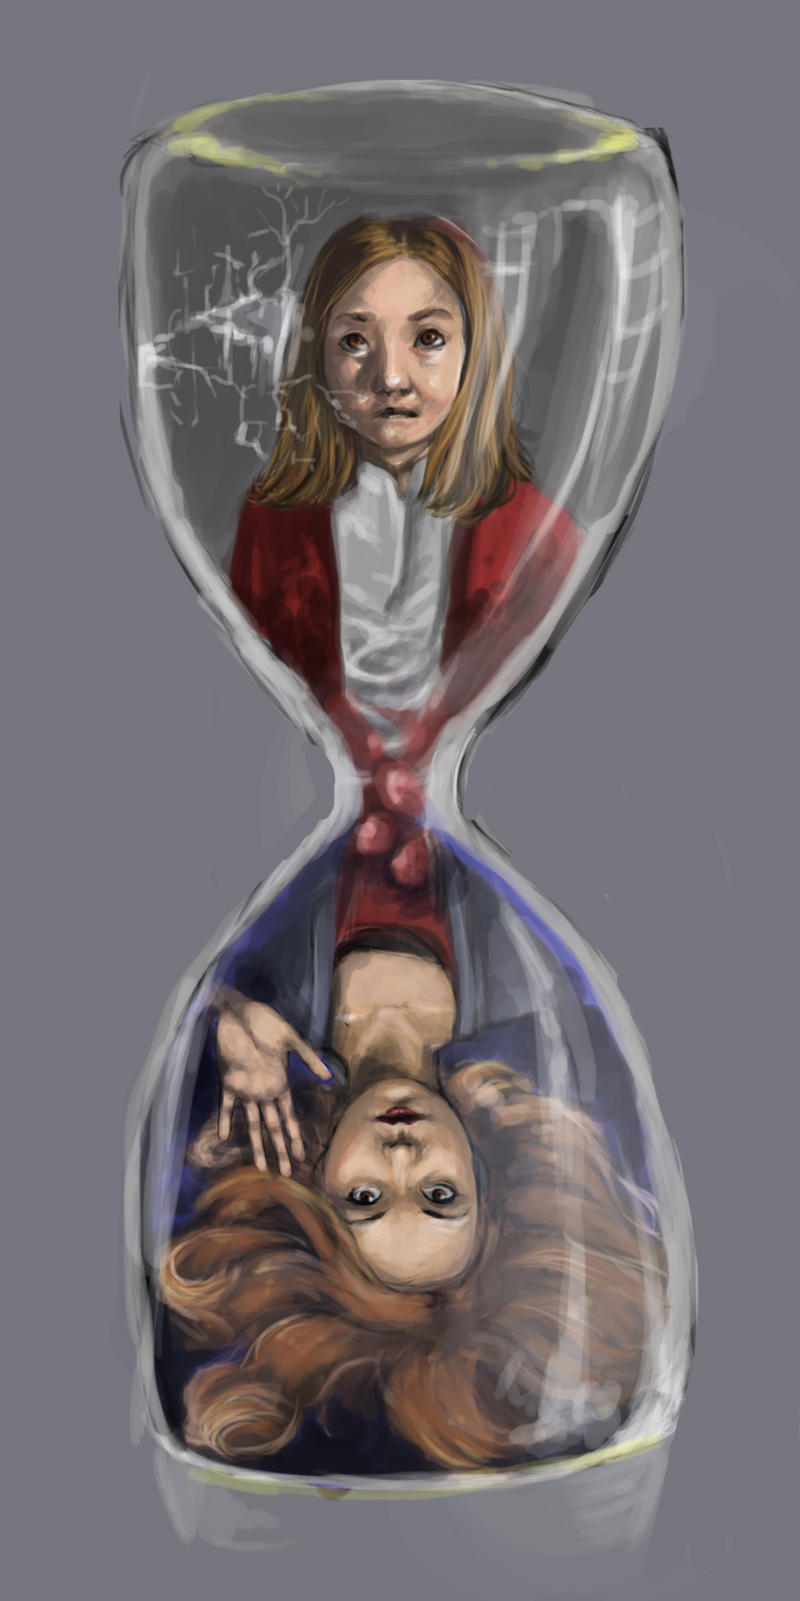 Tick Tock goes the Clock